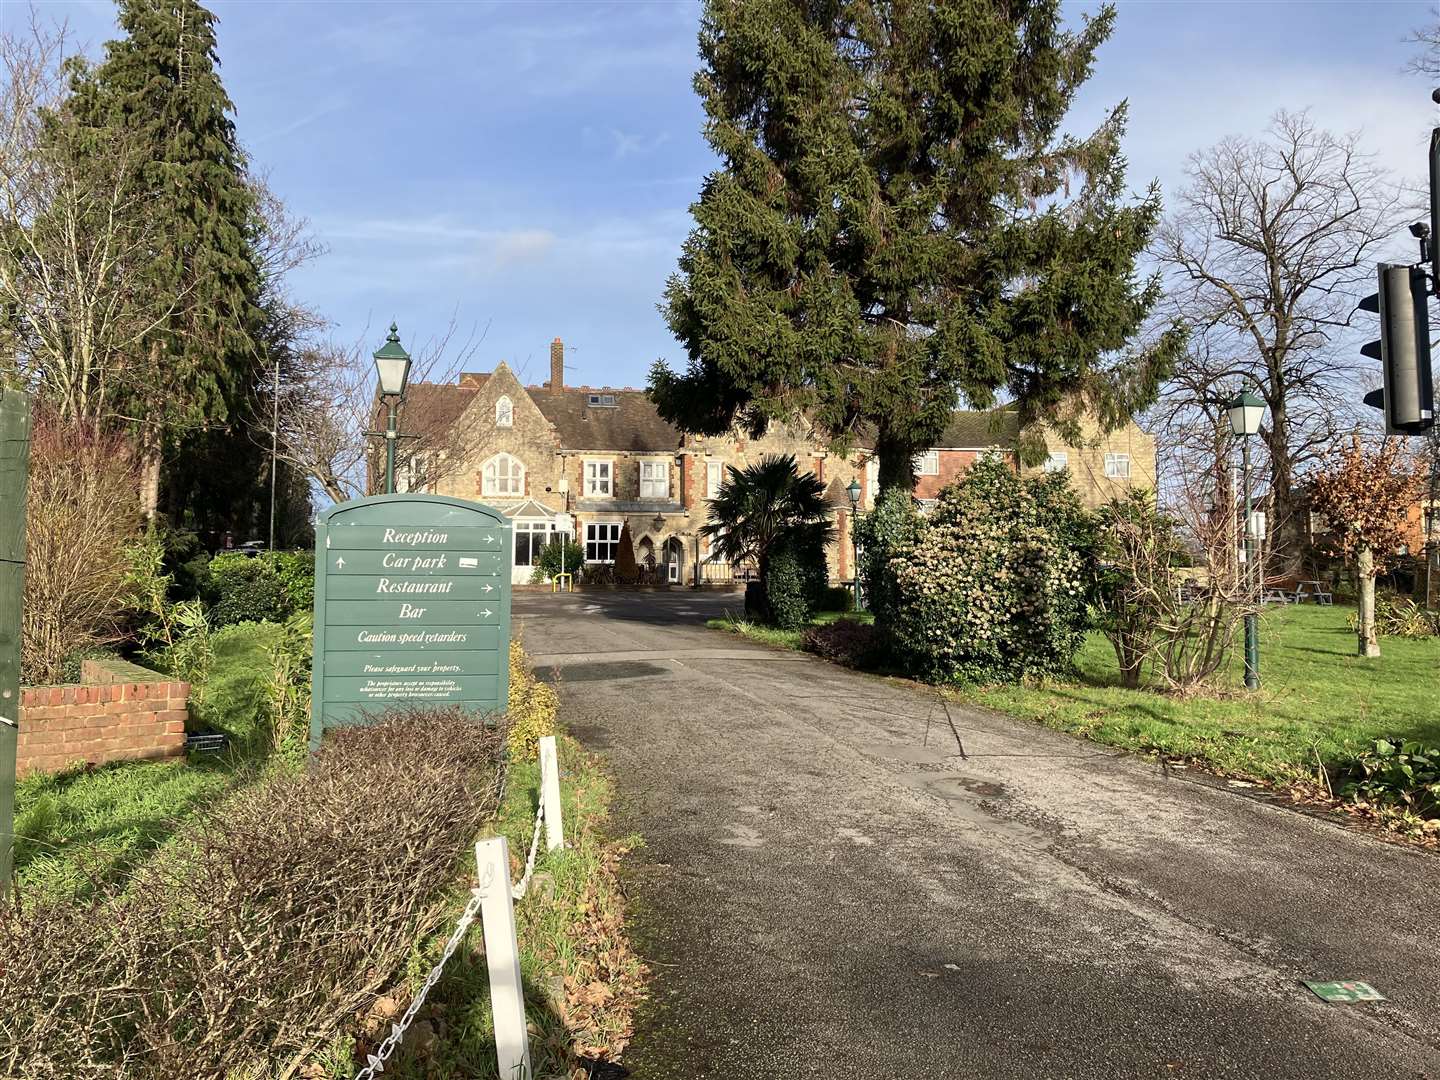 Larkfield Priory Hotel is currently closed for refurbishment